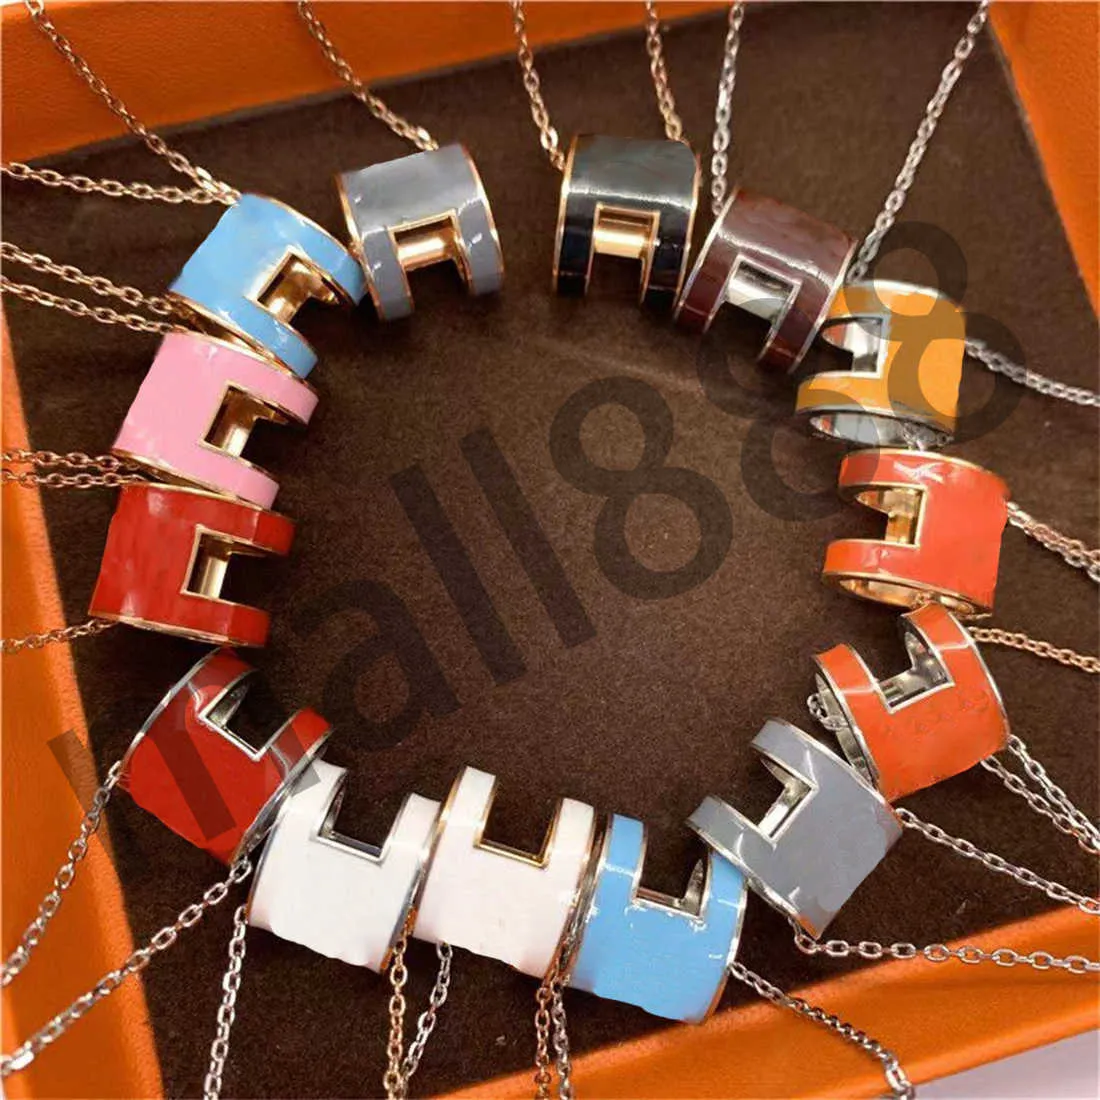 Fashion Gold Plated Pendant Necklace Designer Design Locket Halsband Kedjor för Man Woman Silver Choker Clavicle Jewelry Letter Link Chain With Box